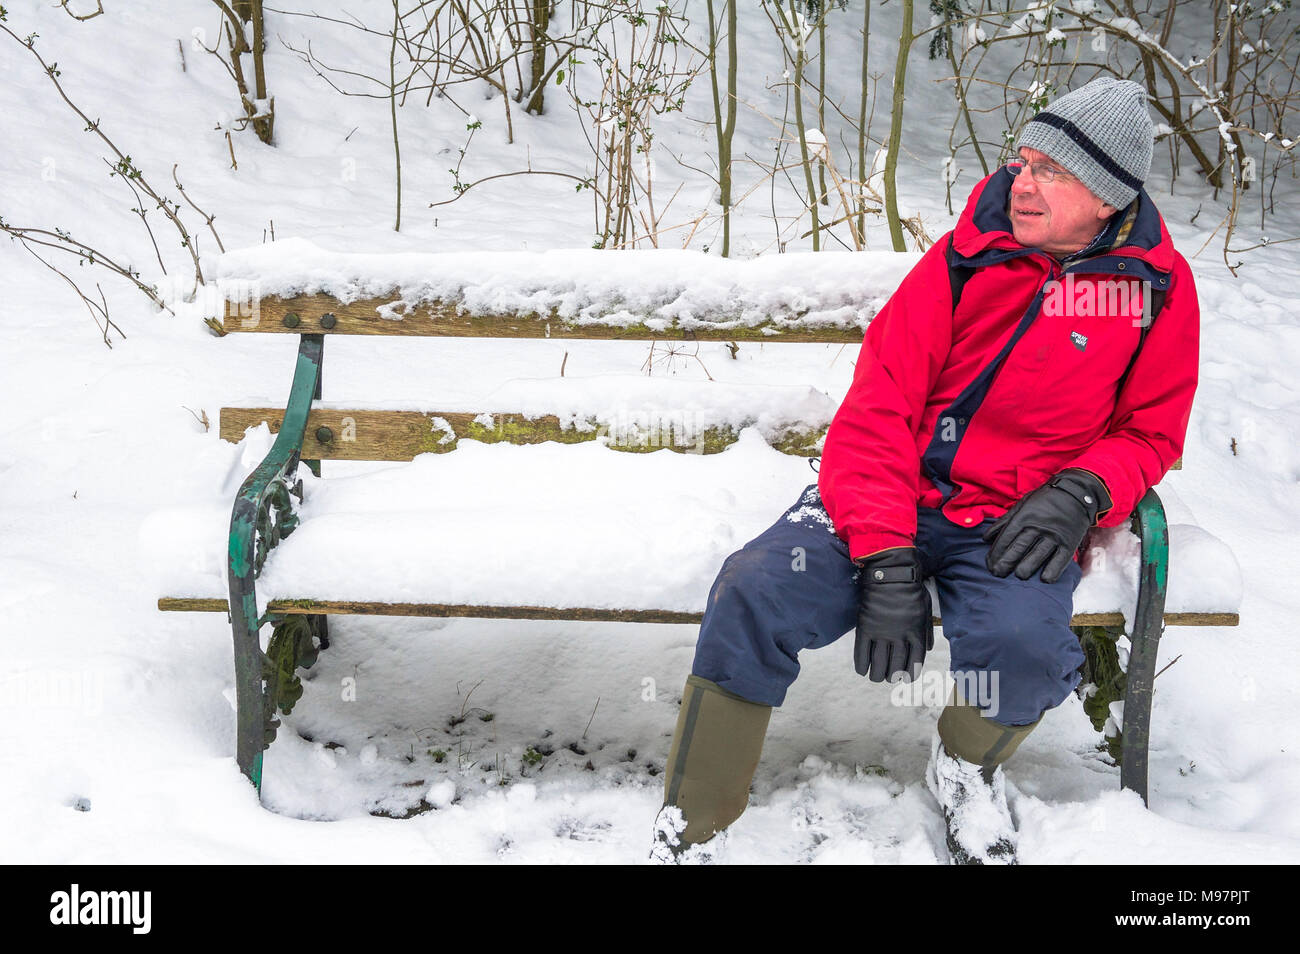 Man with winter clothing sitting on a snow covered bench. Stock Photo